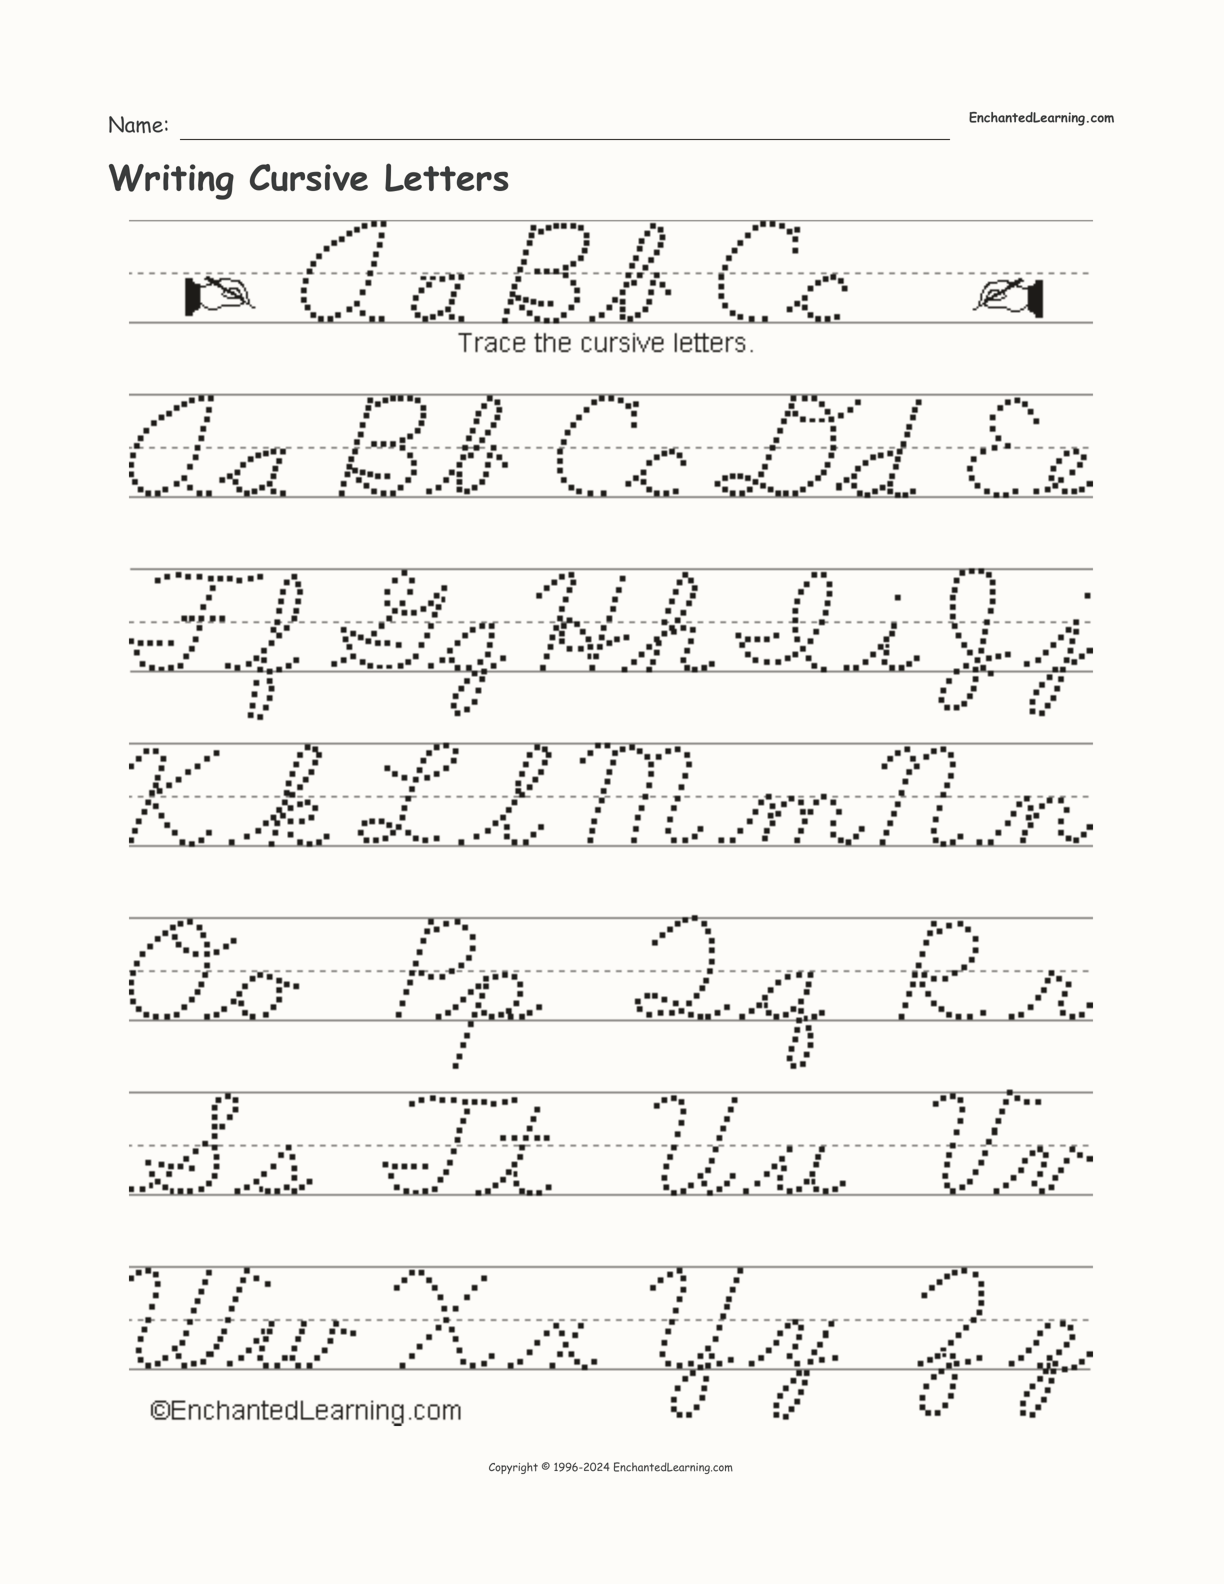 Cursive Handwriting Cursive Writing A To Z Printable Form Templates And Letter